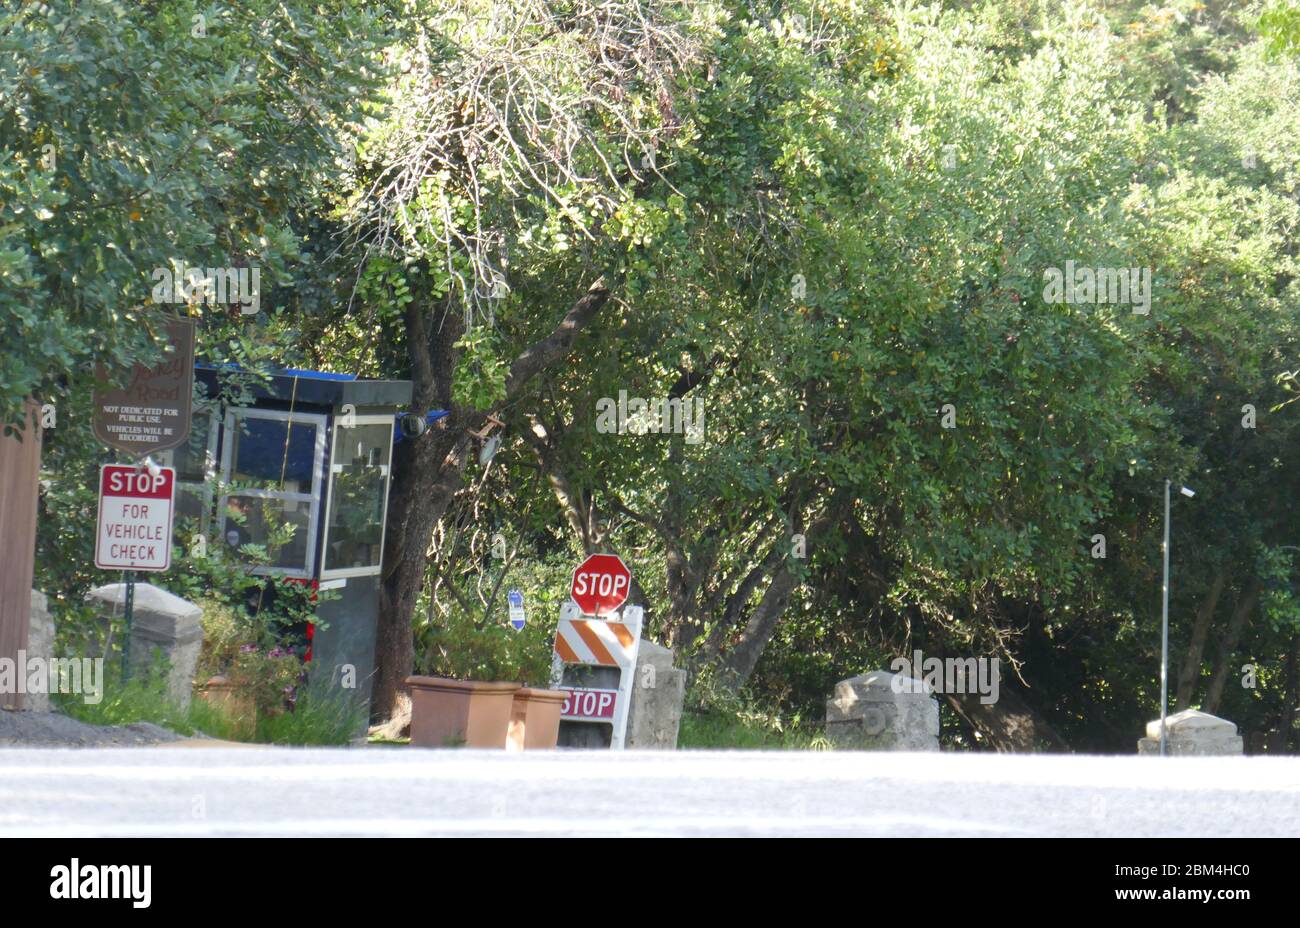 Beverly Hills, California, USA 6th May 2020 A general view of atmosphere of singer Adele, actress Nicole Kidman, actress Jennifer Lawrence, actor Ashton Kutcher and Actress Mila Kunis  residences on May 6, 2020 in Beverly Hills, California, USA. Photo by Barry King/Alamy Stock Photo Stock Photo